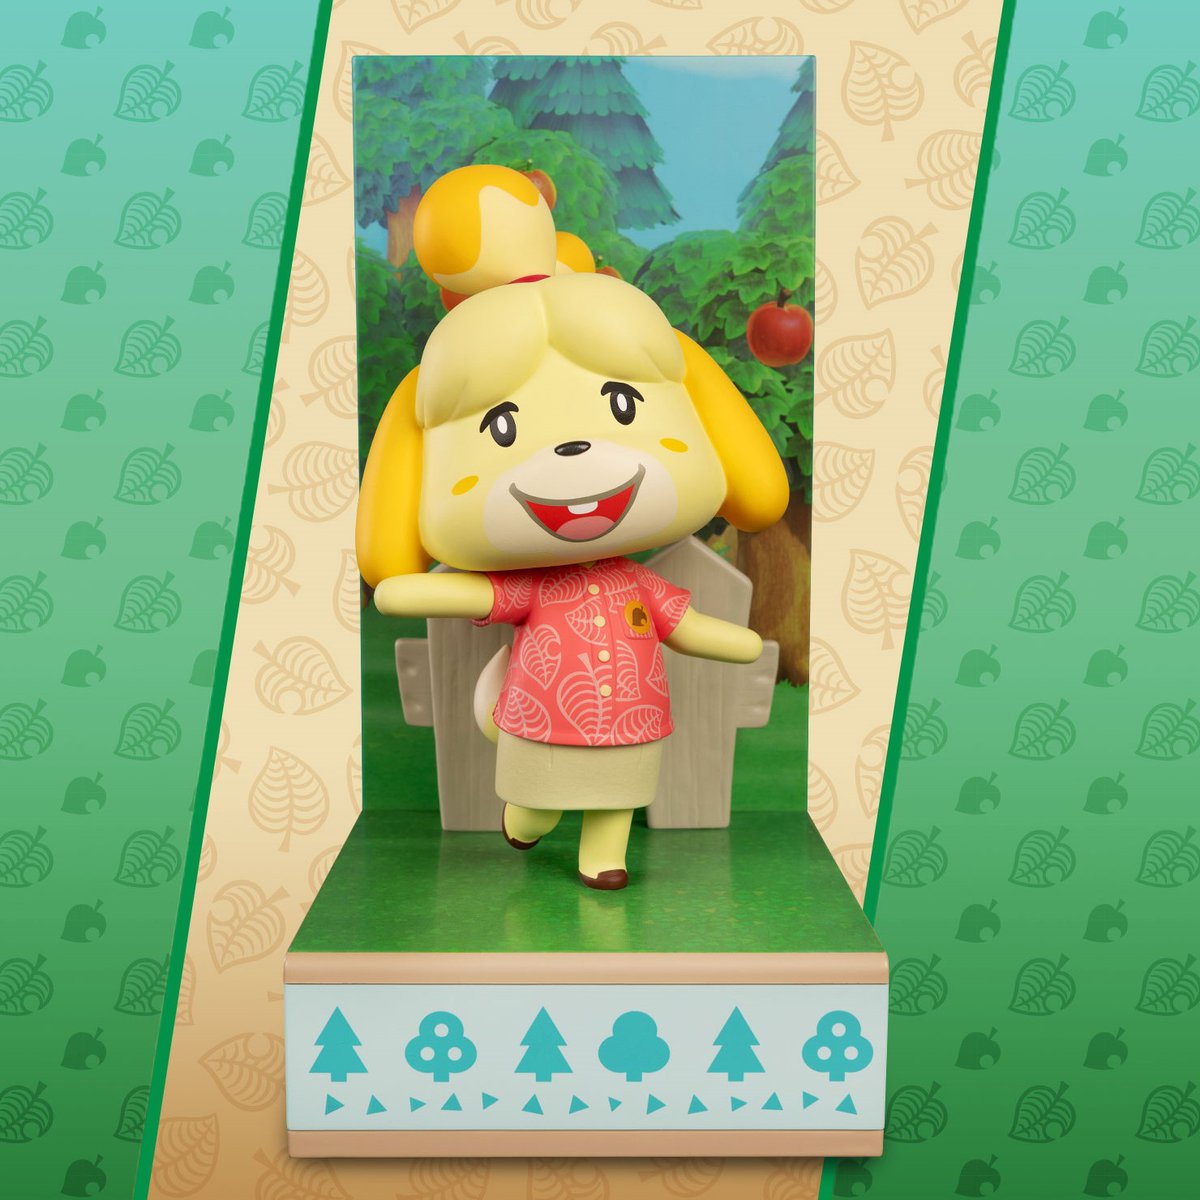 ISABELLE (Statue) 🍃🌳🌲
*EARLY BIRD PRE-ORDER* 
F4F▶️(bit.ly/4aB9MjI)

#First4Figures #F4F #VideoGames #Nintendo #AnimalCrossing #AnimalCrossingNewHorizons #AnimalCrossingIsabelle #CollectibleStatues